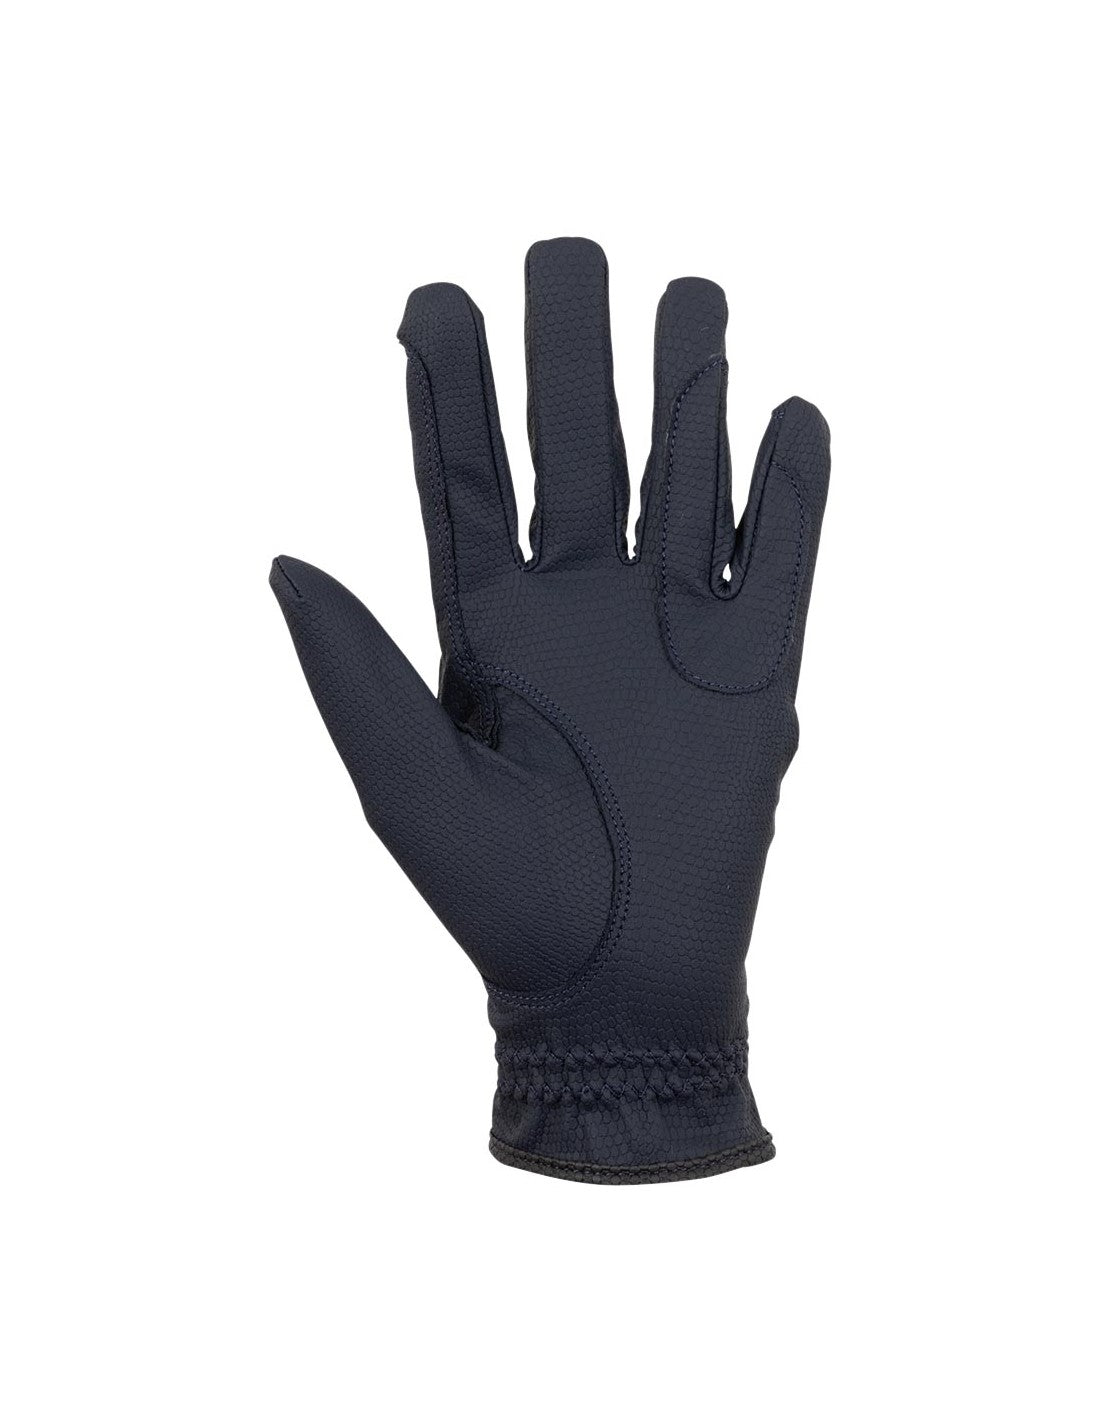 BR Gloves Competition - Navy - Size 6 1/2